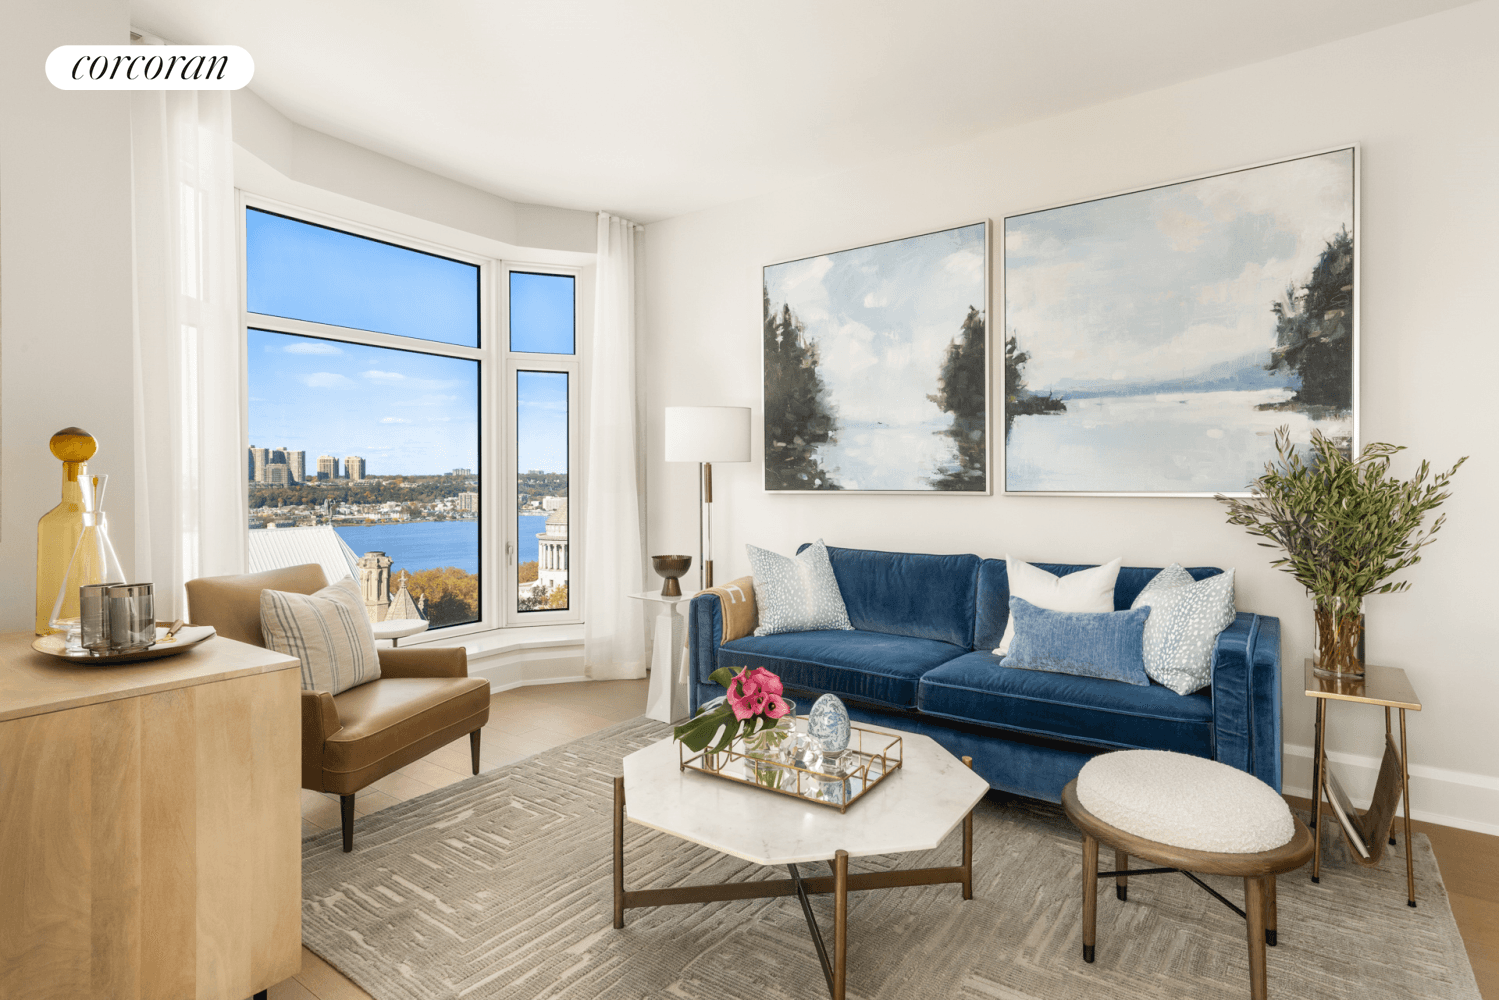 Boasting unobstructed eastern views and expansive windows, Residence 16D is a 706 square foot one bedroom home that receives plentiful light and air.